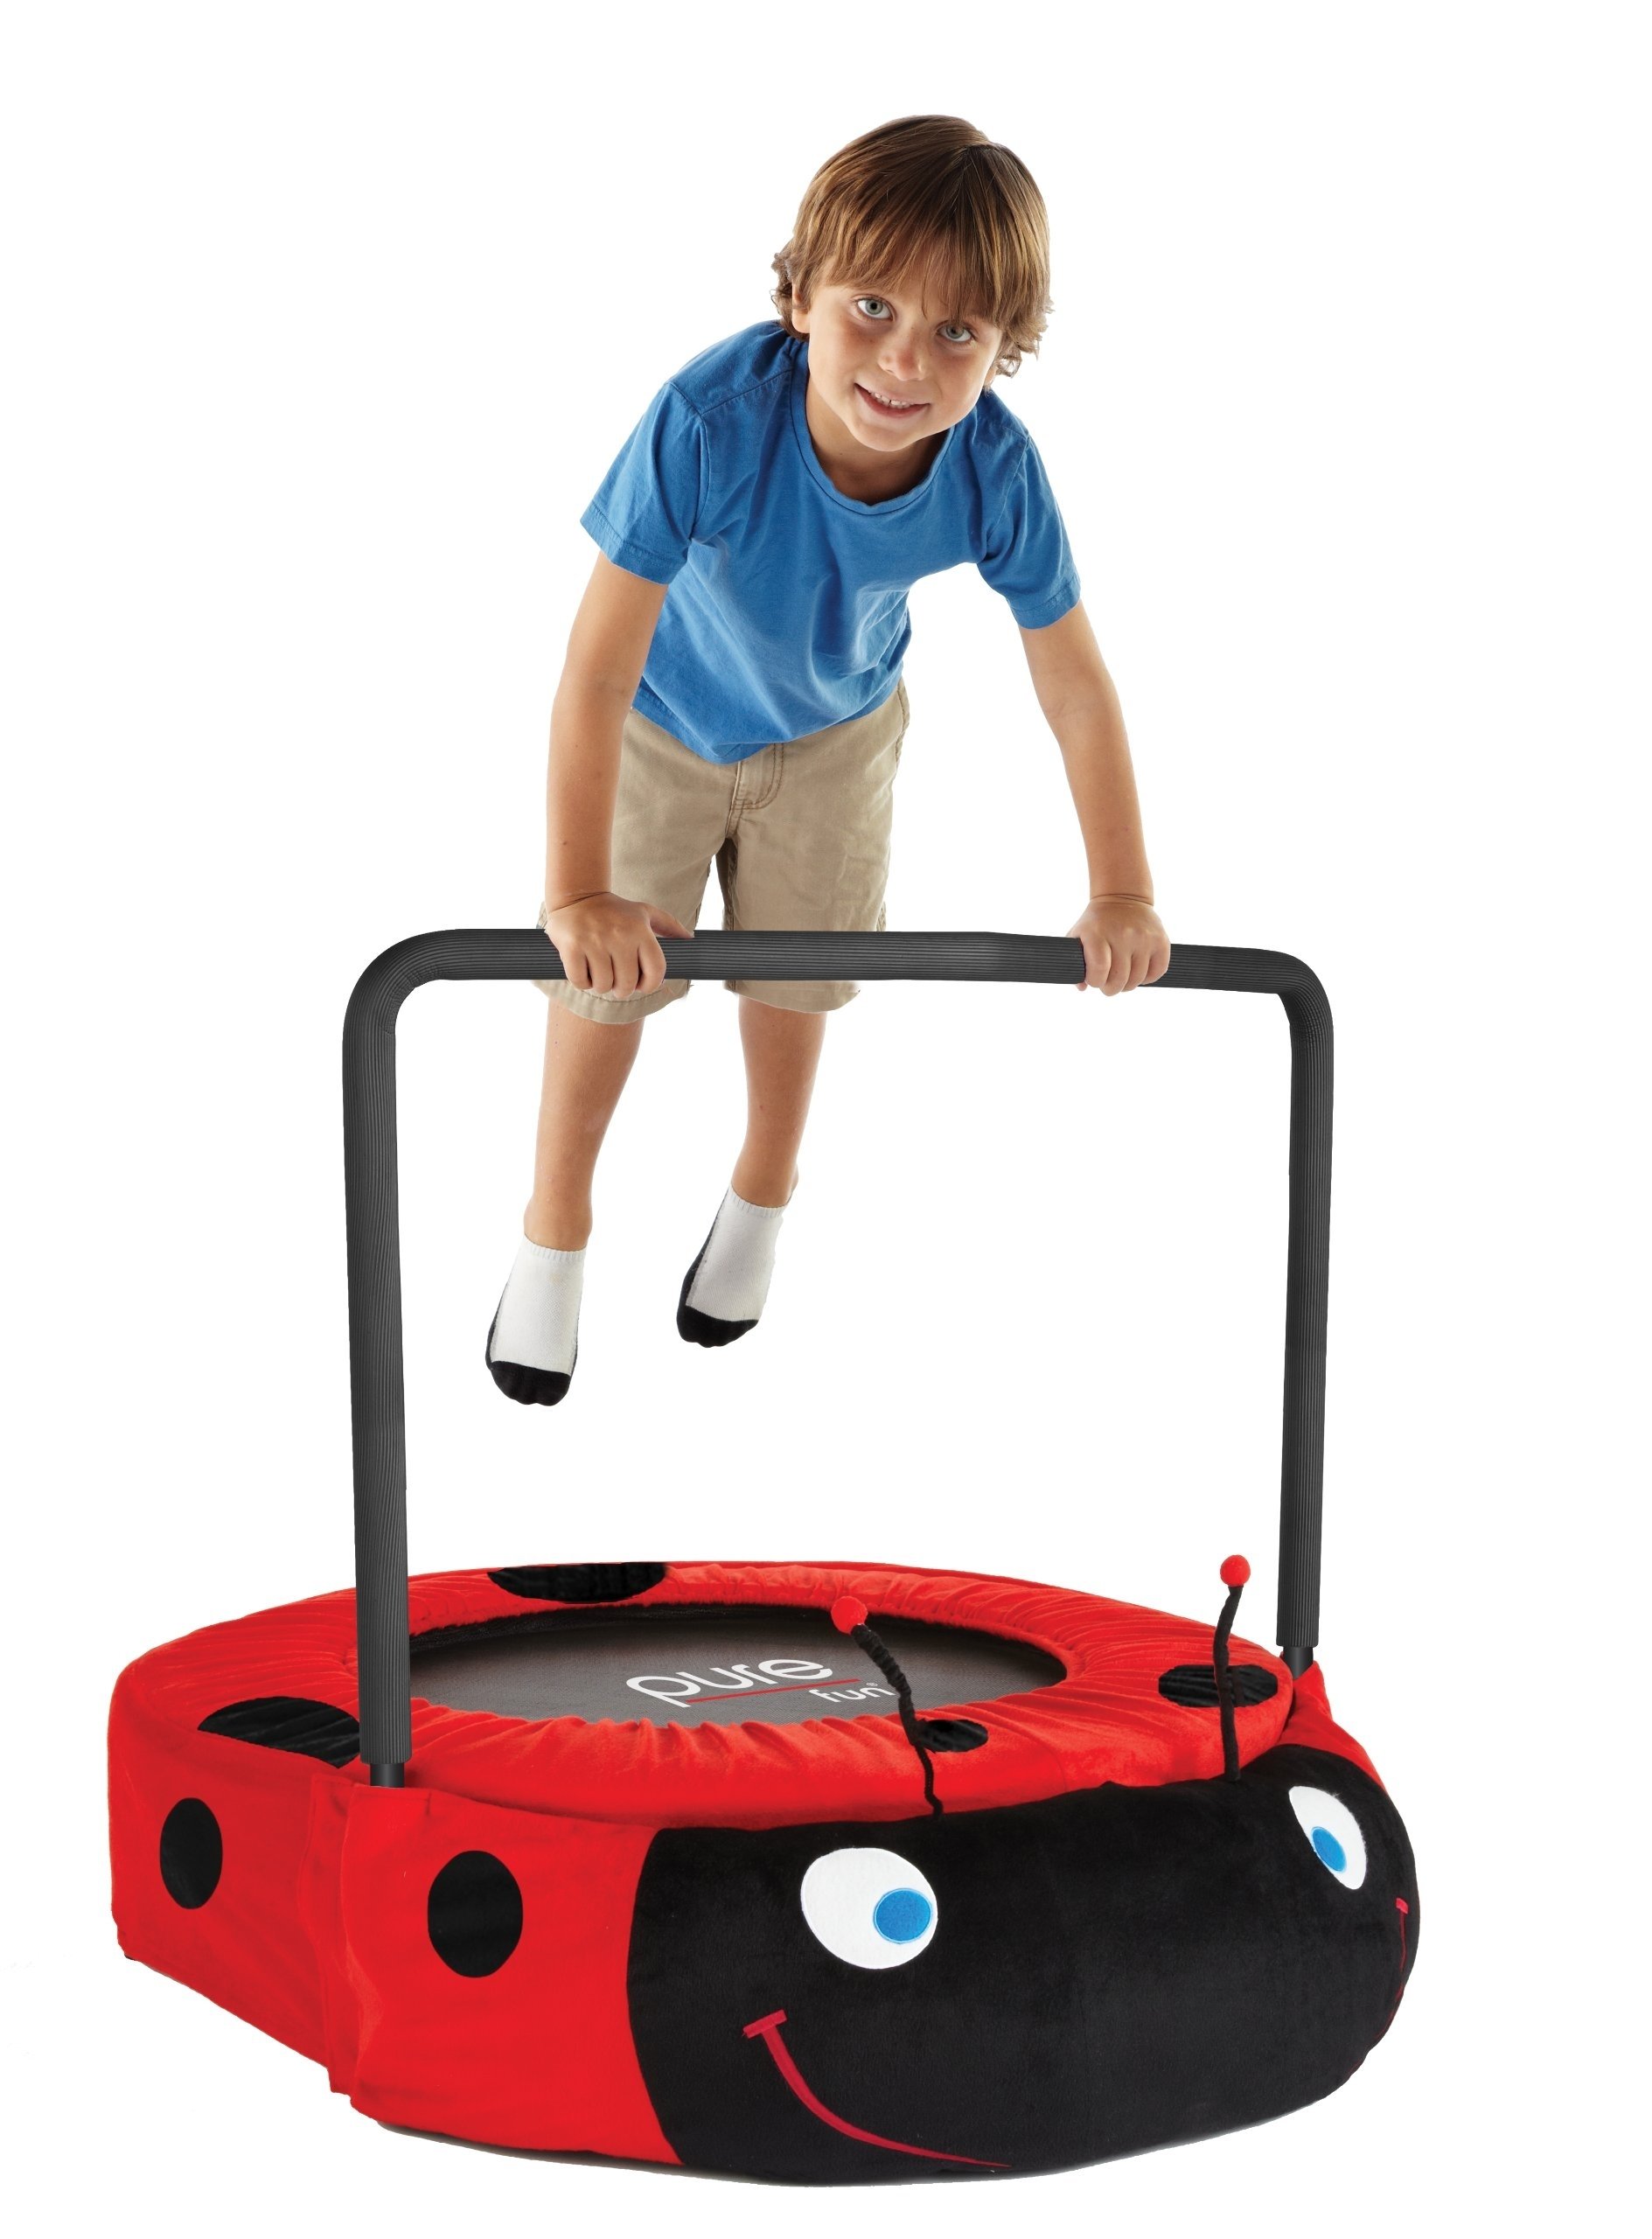 10 Famous Toy Ideas For 5 Year Old Boy best gifts and toys for 5 year old boys gift trampolines and toy 3 2022